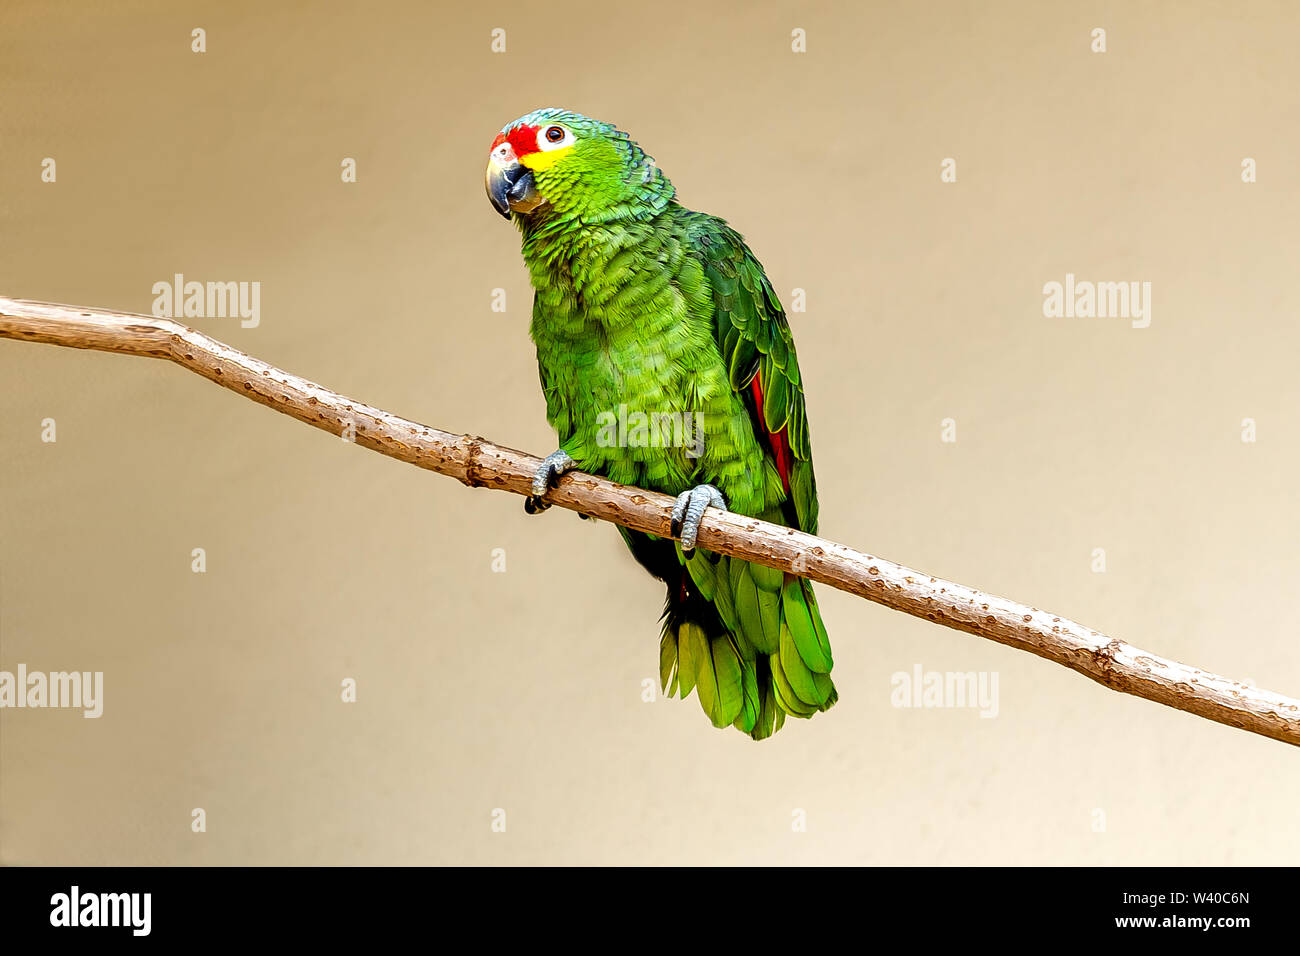 Papagei red-throated Amazon, close-up Stockfoto